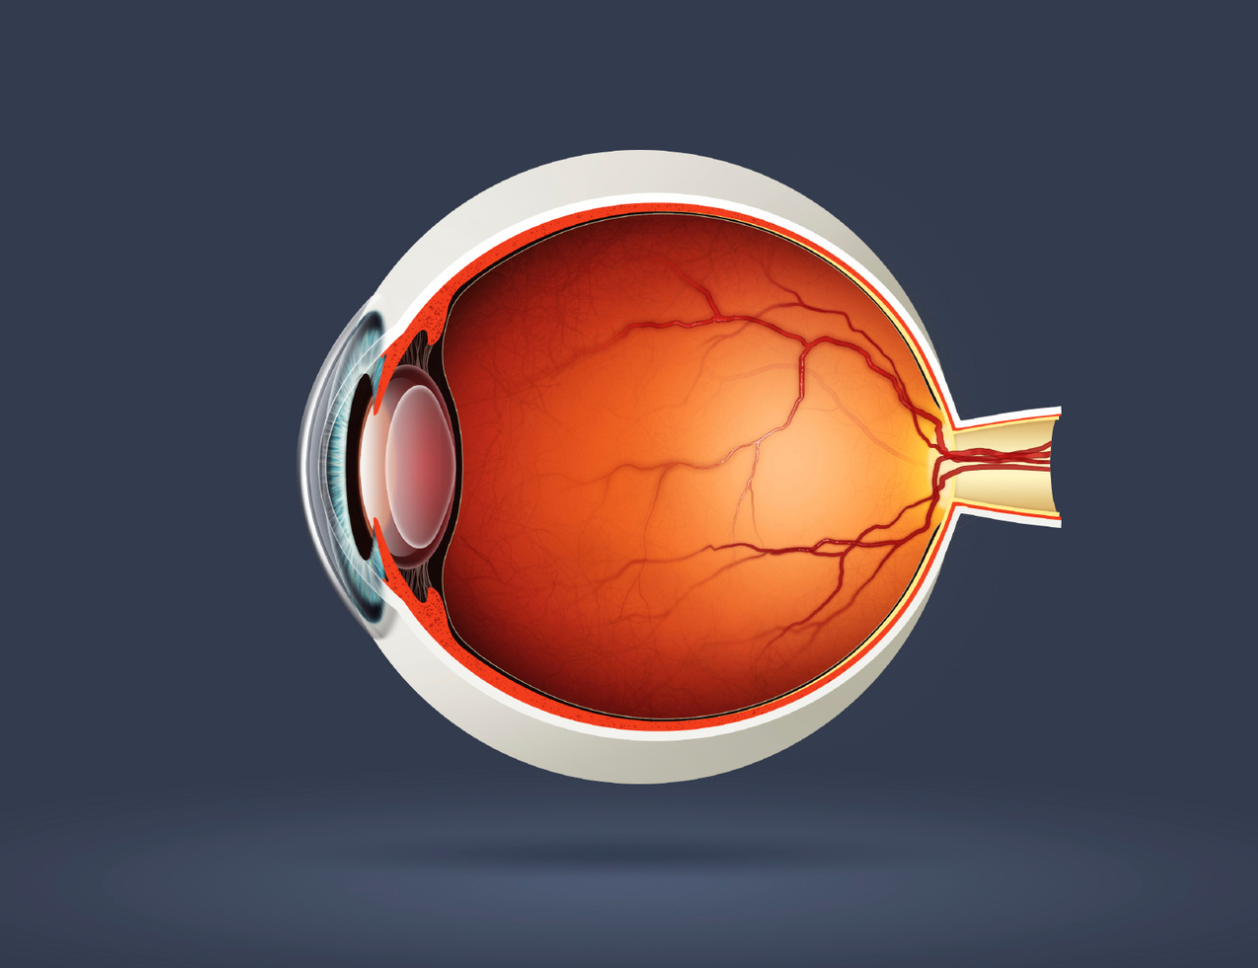 Sandoz Launches Generic Version of Treatment for Ocular Hypertension 